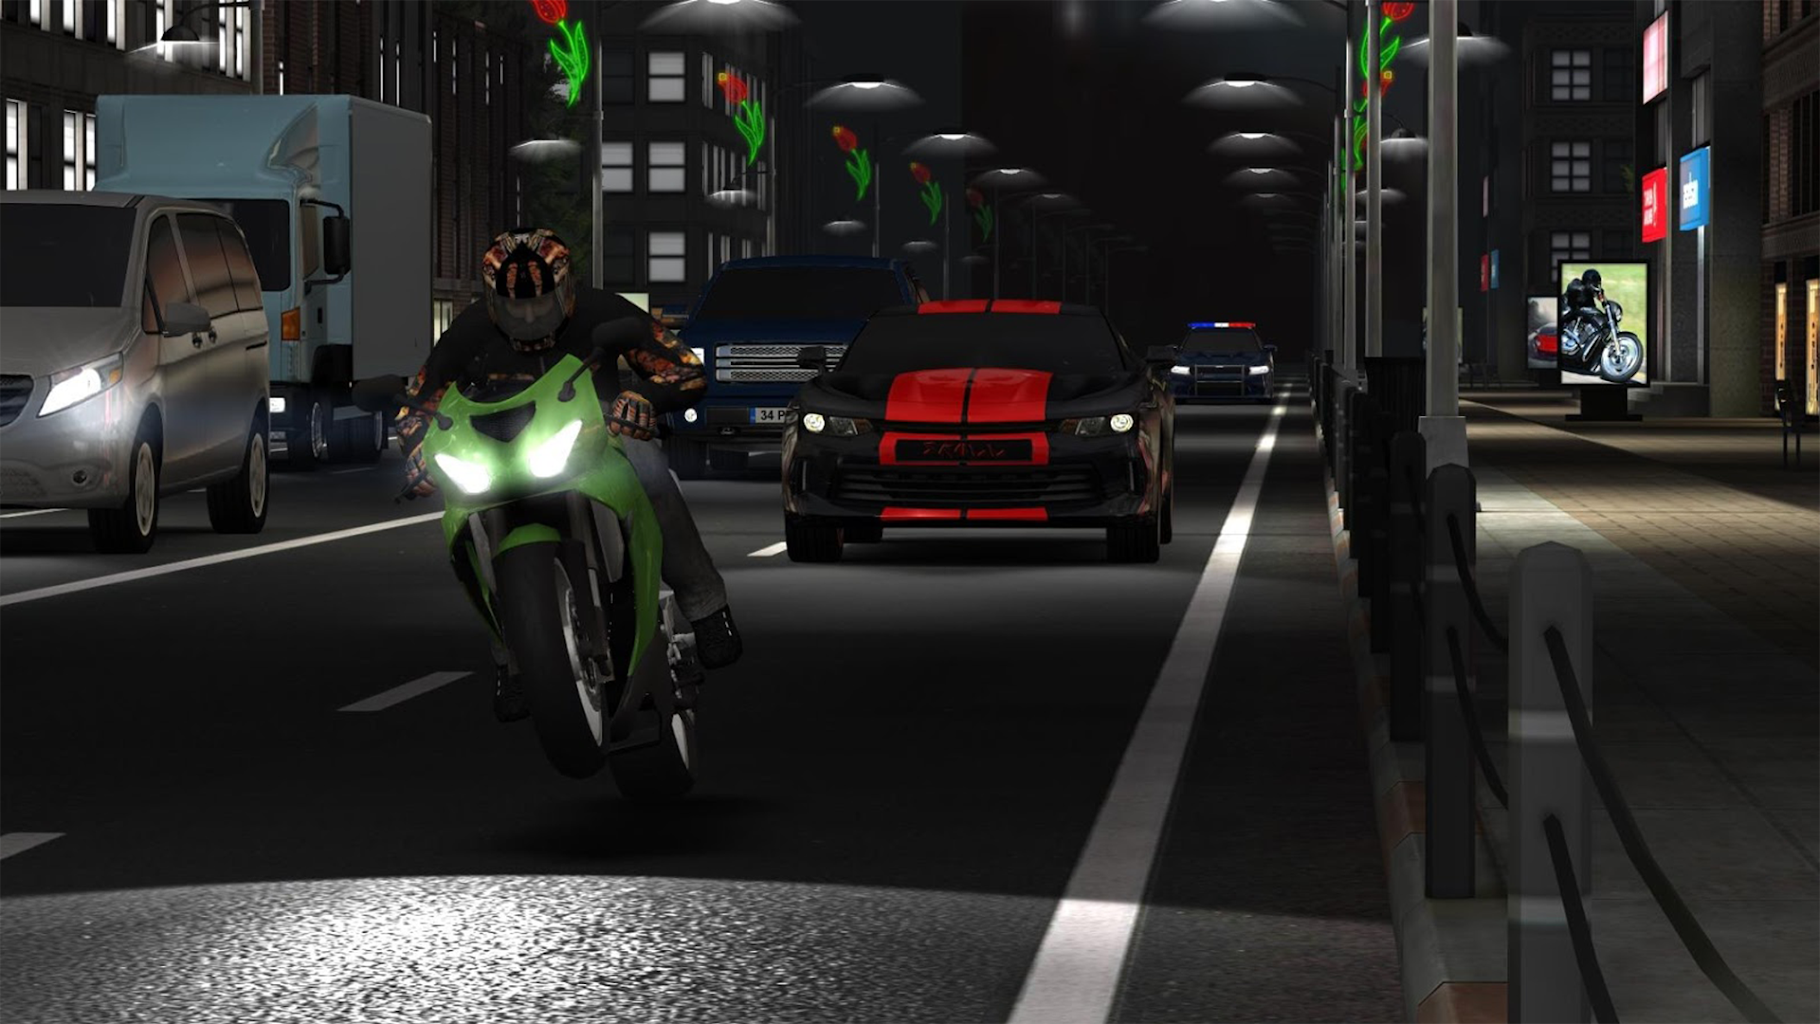 Racing Fever : Moto for ios download